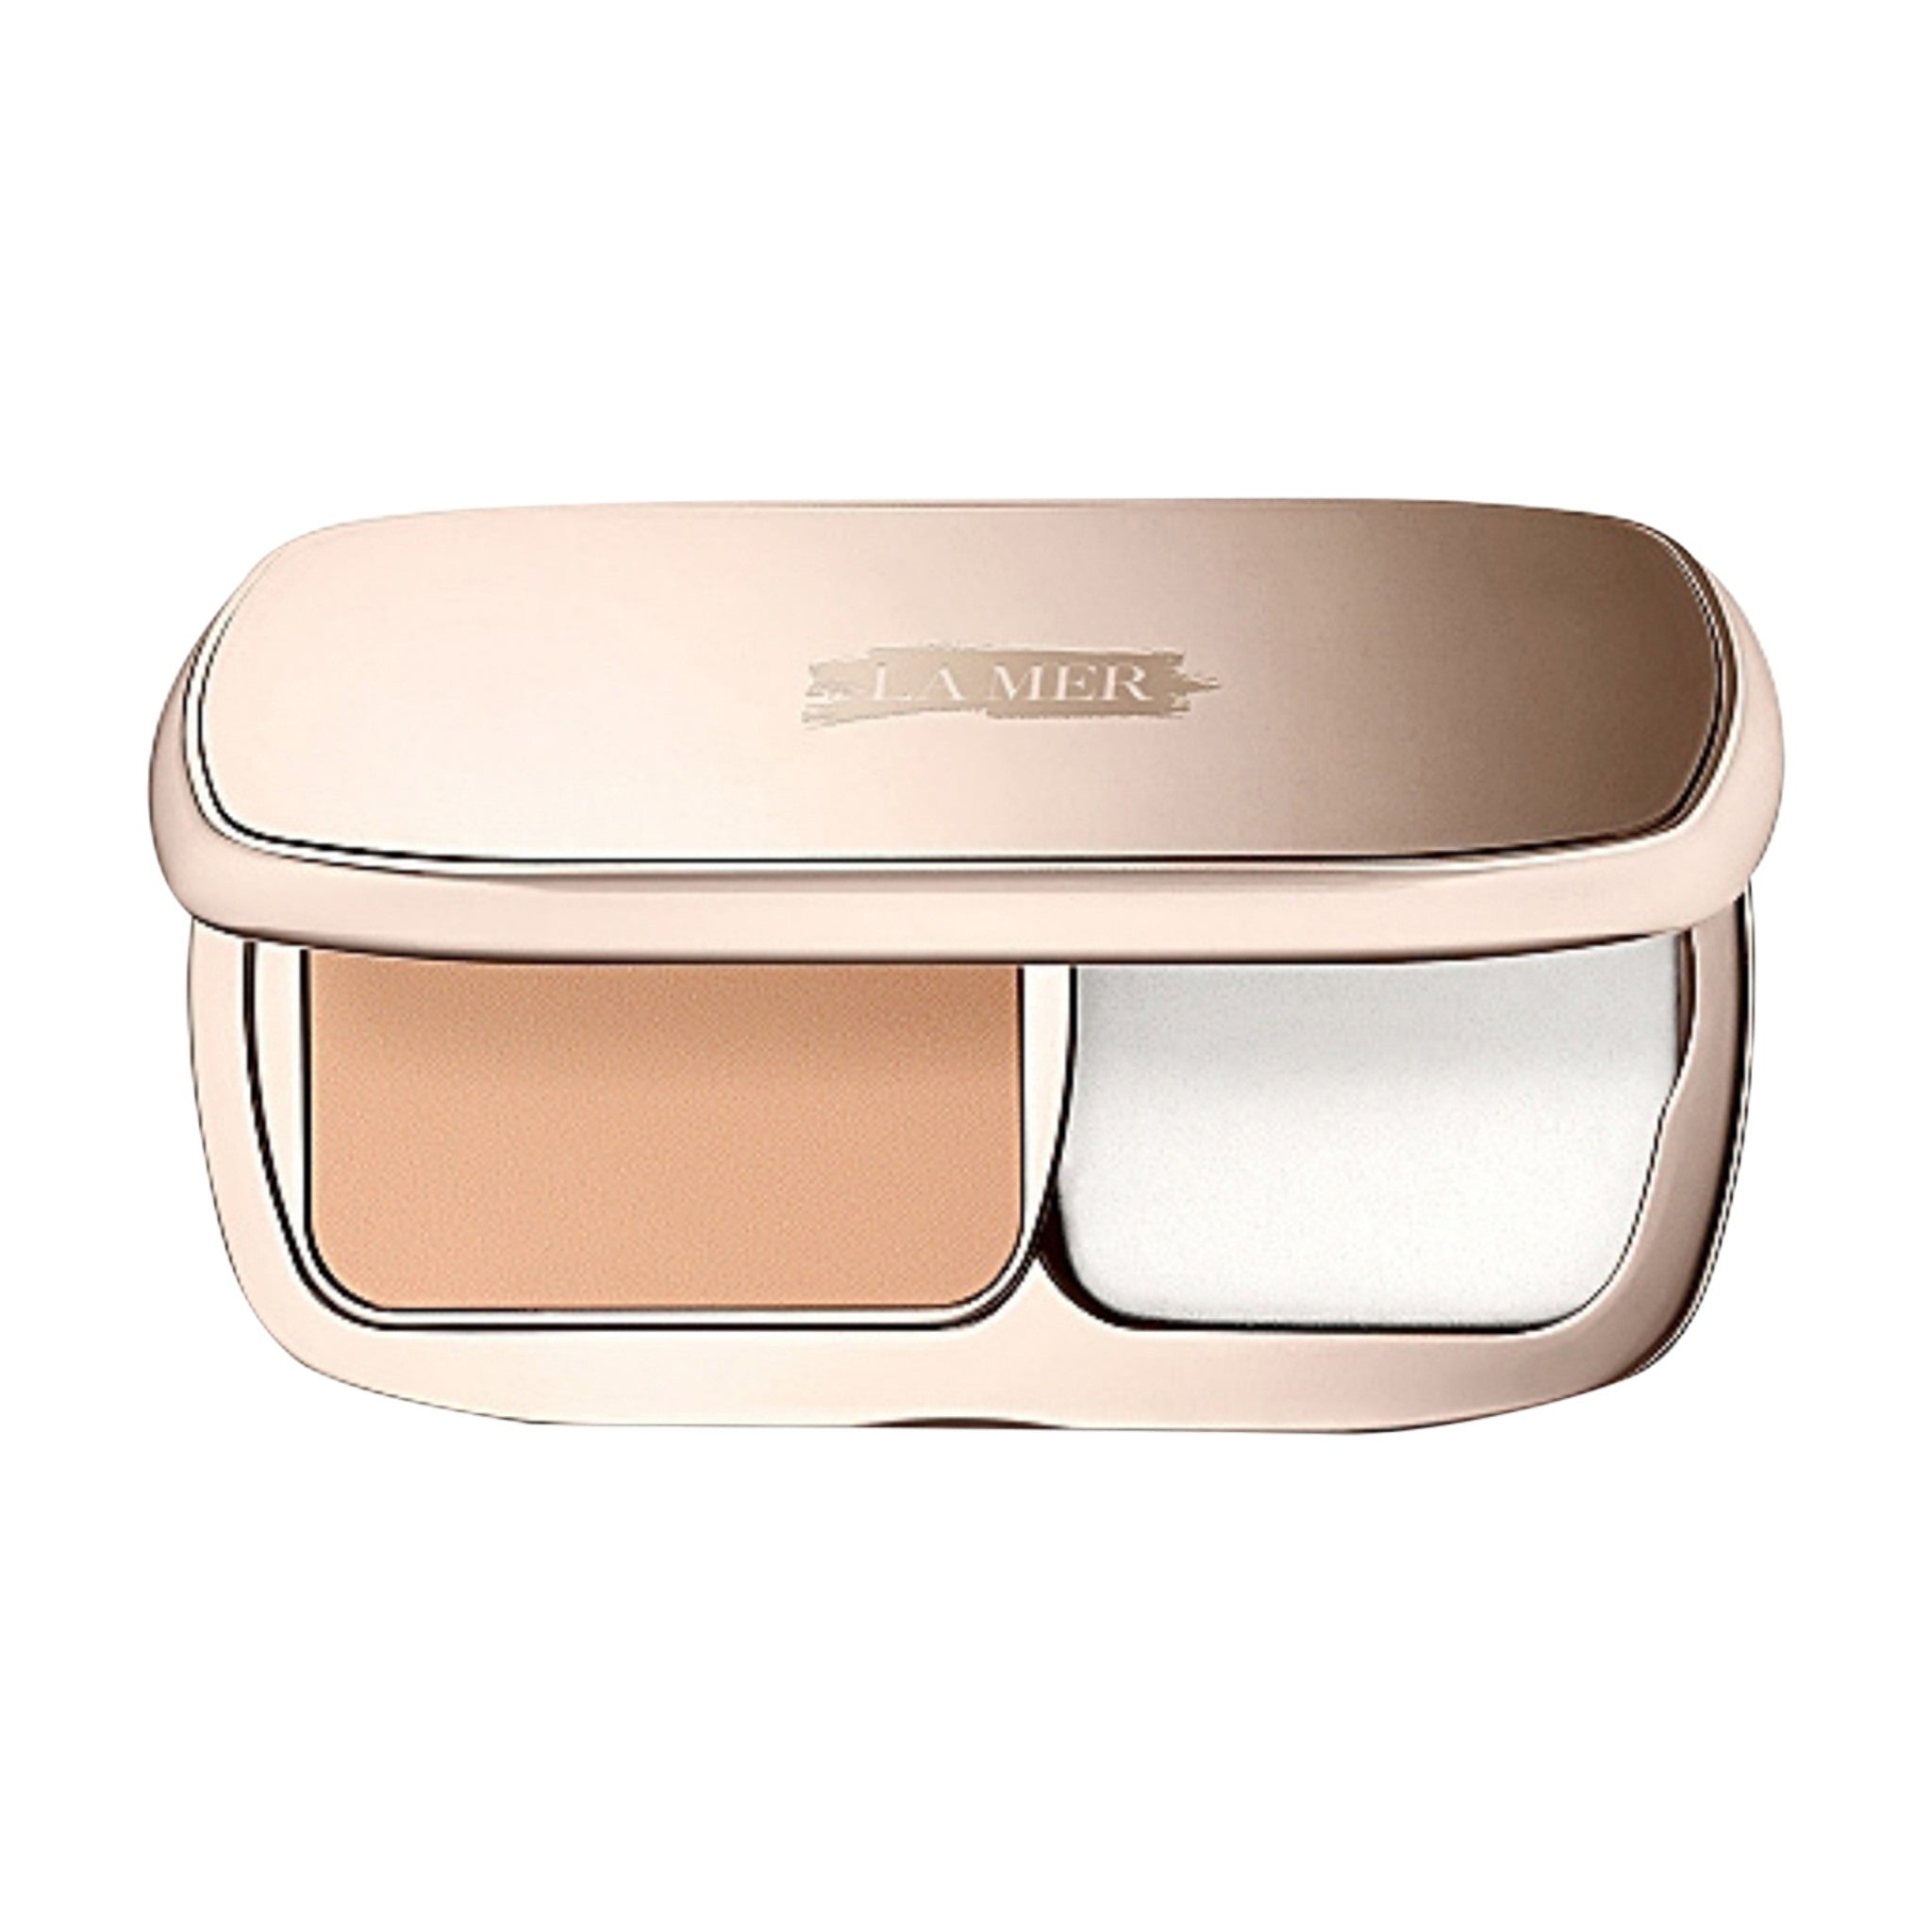 La Mer The Soft Moisture Powder Foundation SPF 30 Color/Shade variant: Rose main image. This product is for medium complexions